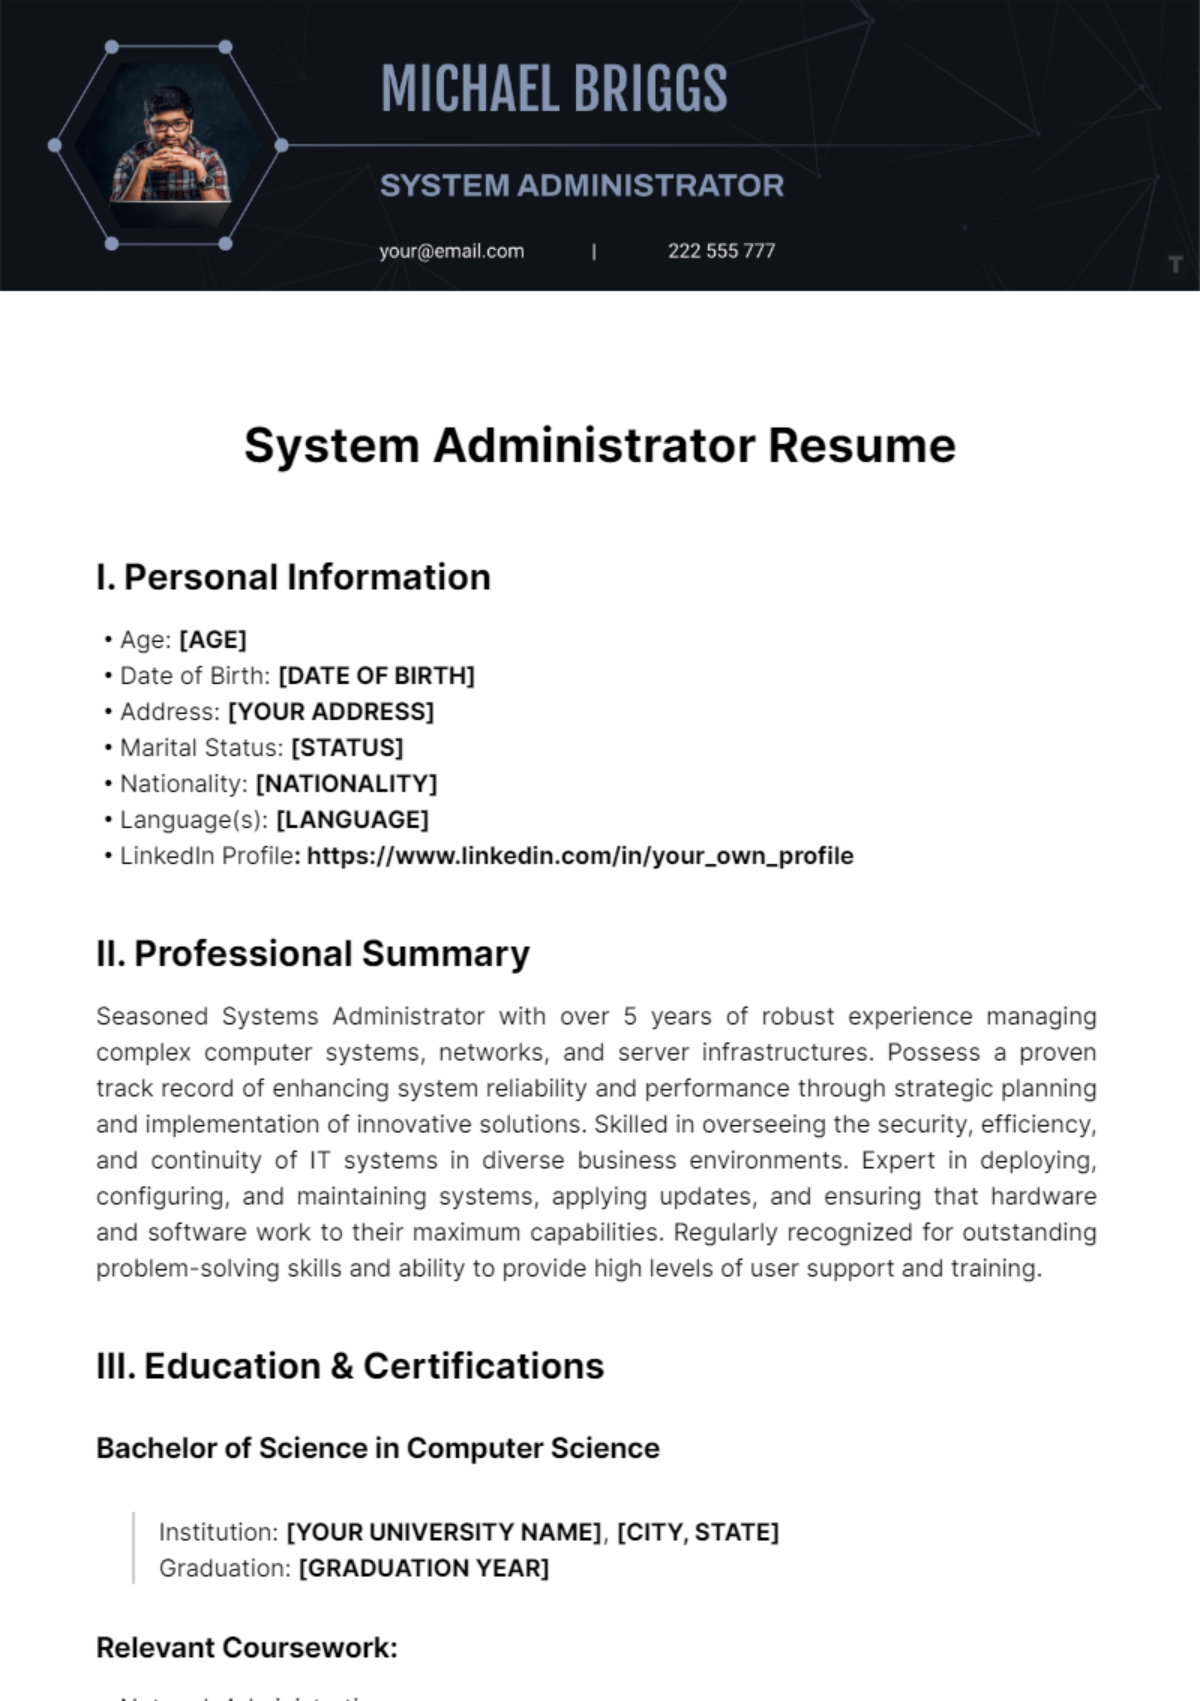 System Administrator Resume Template